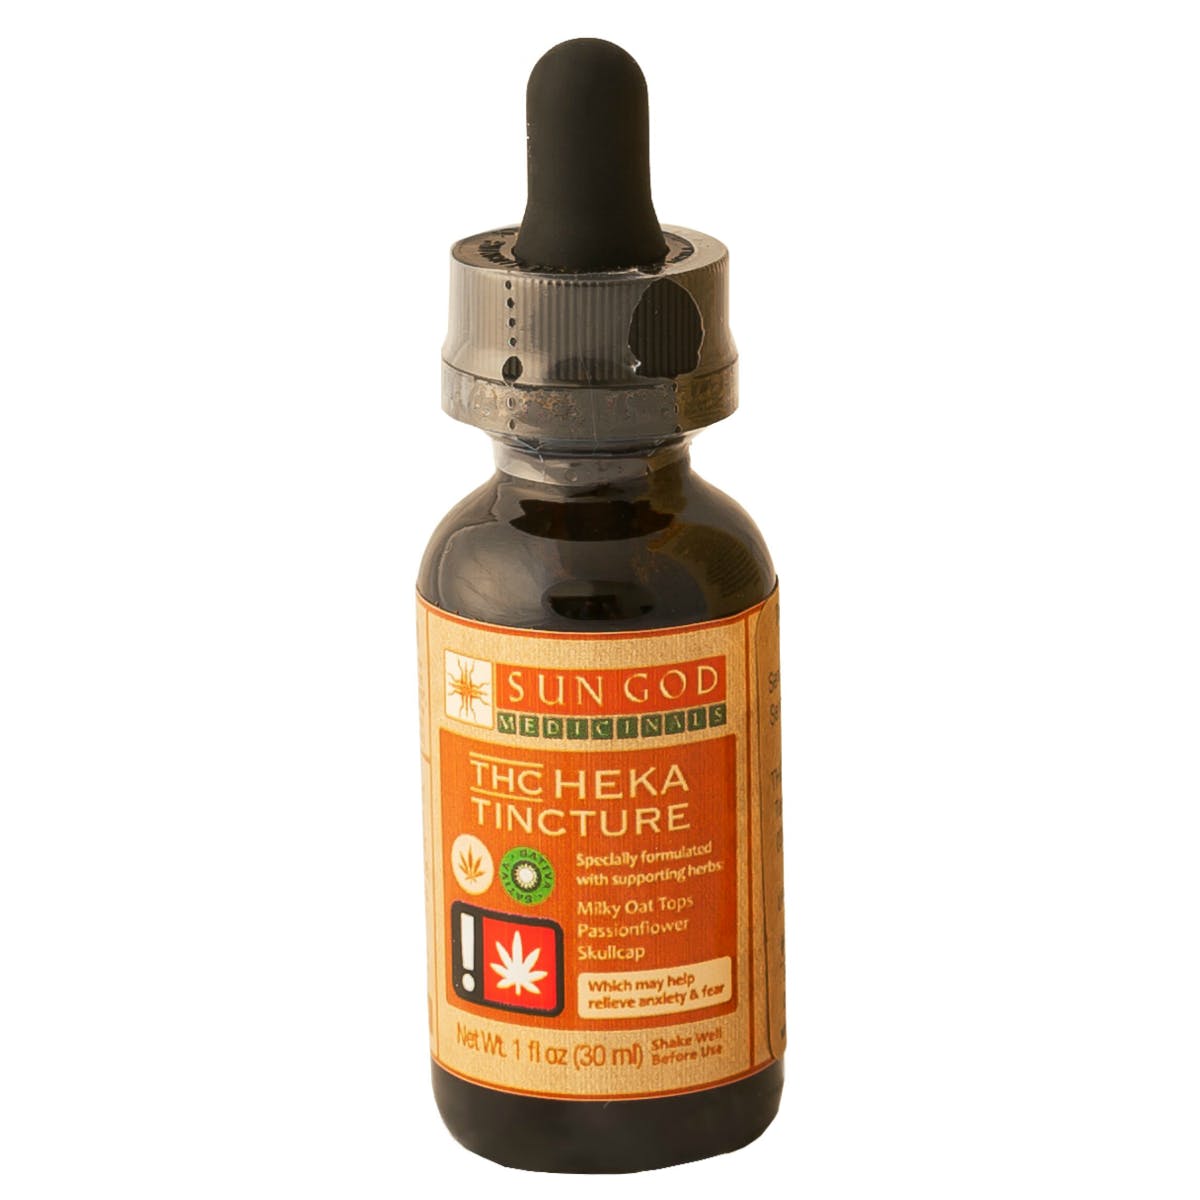 Heka Herbal Infused THC Tincture